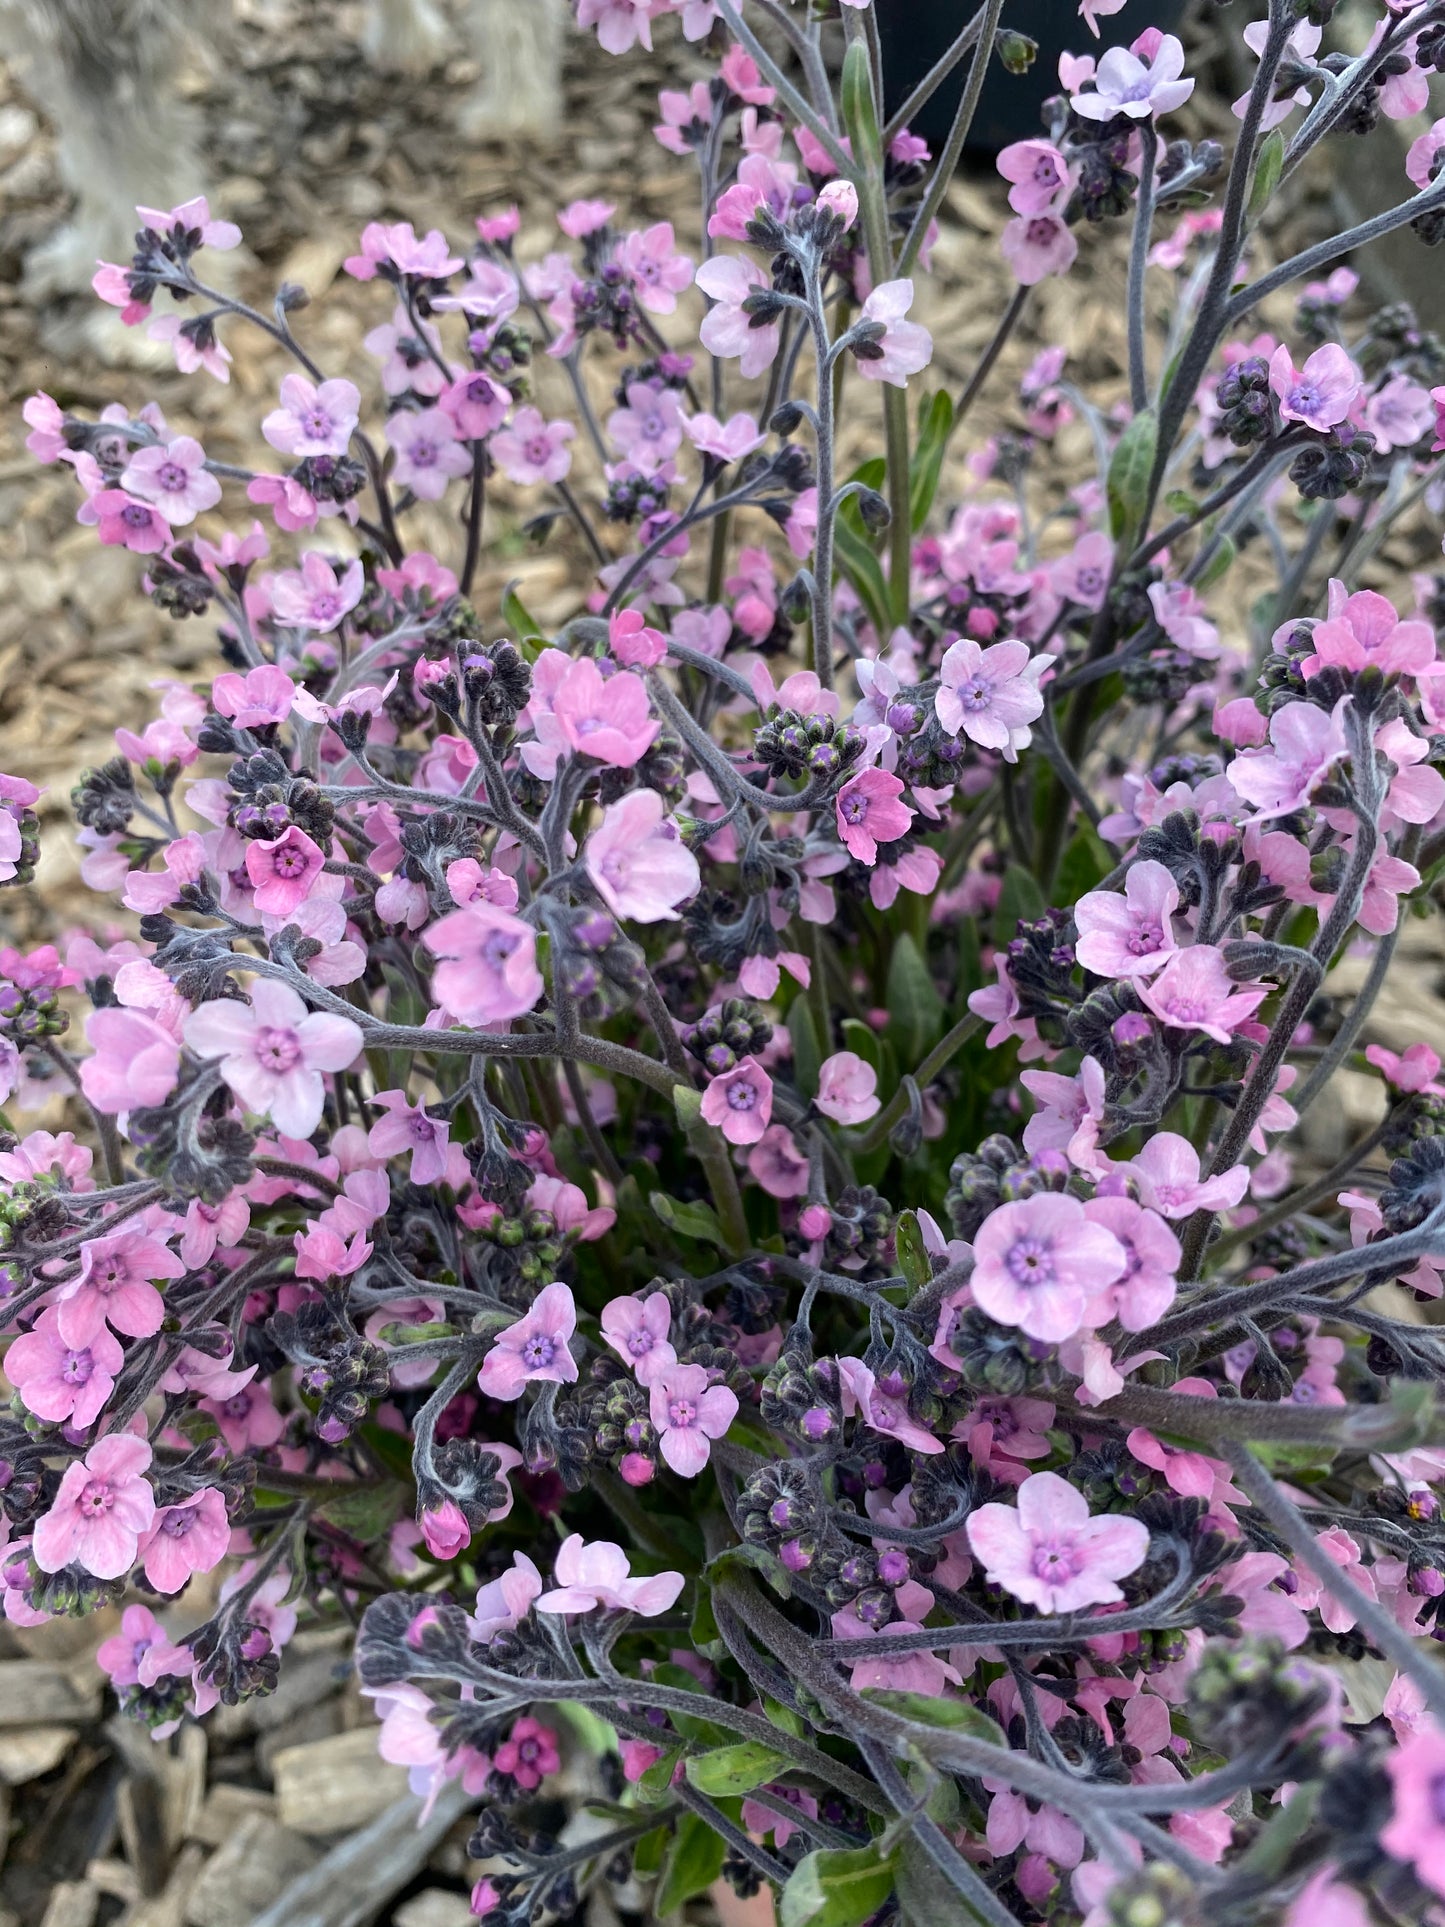 Chinese forget-me-nots "Mystic Pink"